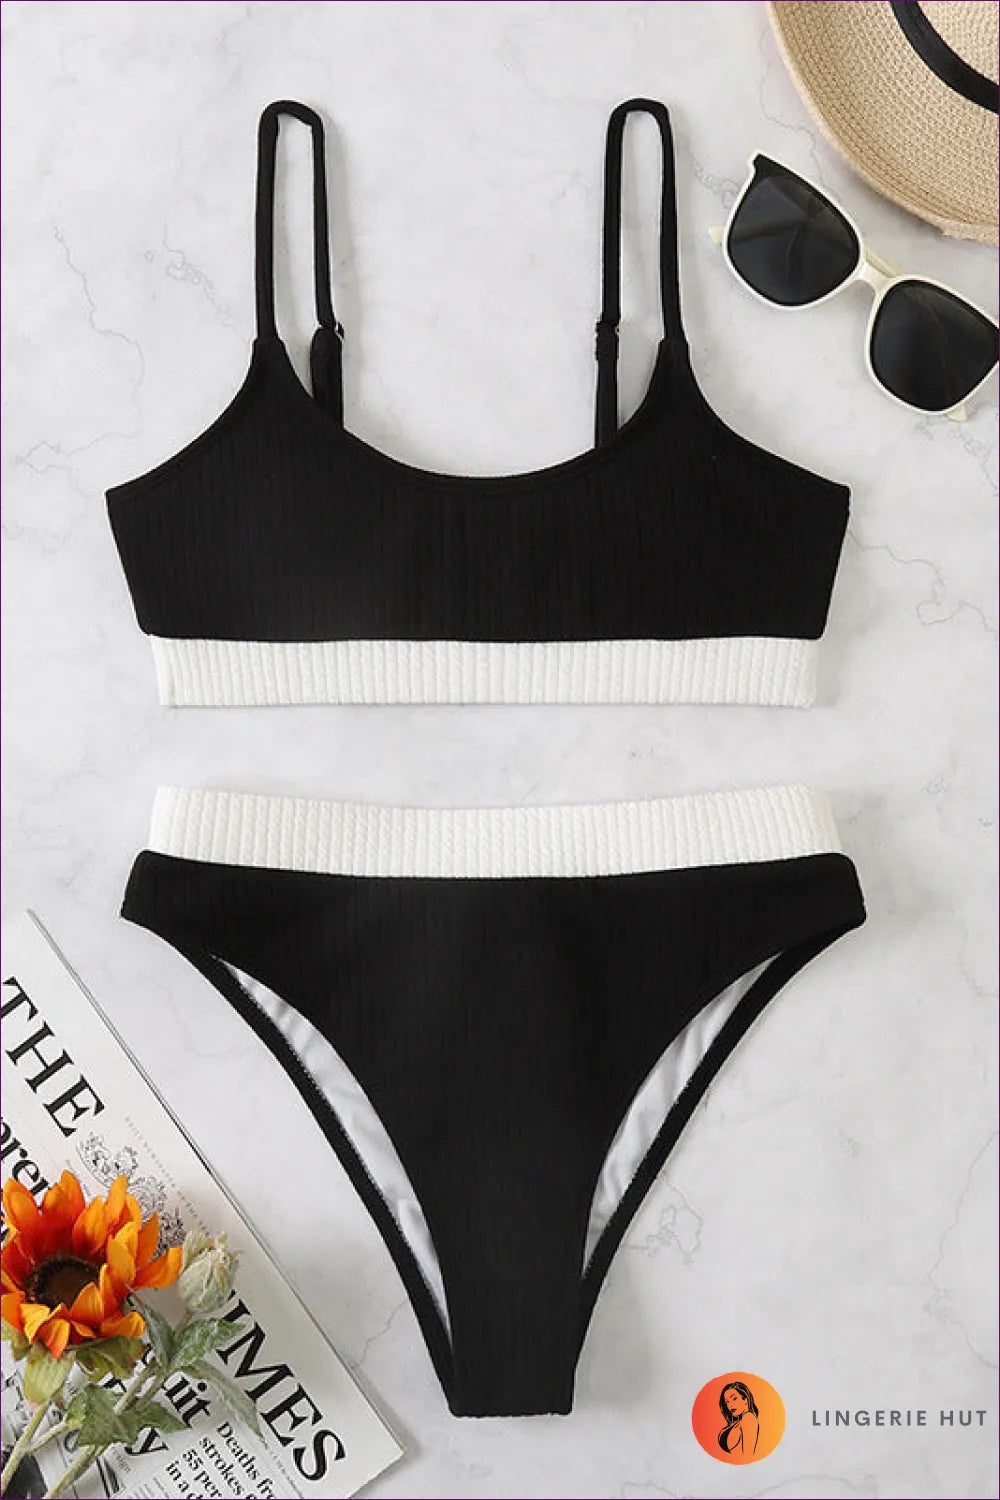 Embrace Boho Chic Vibes And Unleash Your Inner Goddess With Our Color Block Bikini. Perfect For Beach Getaways